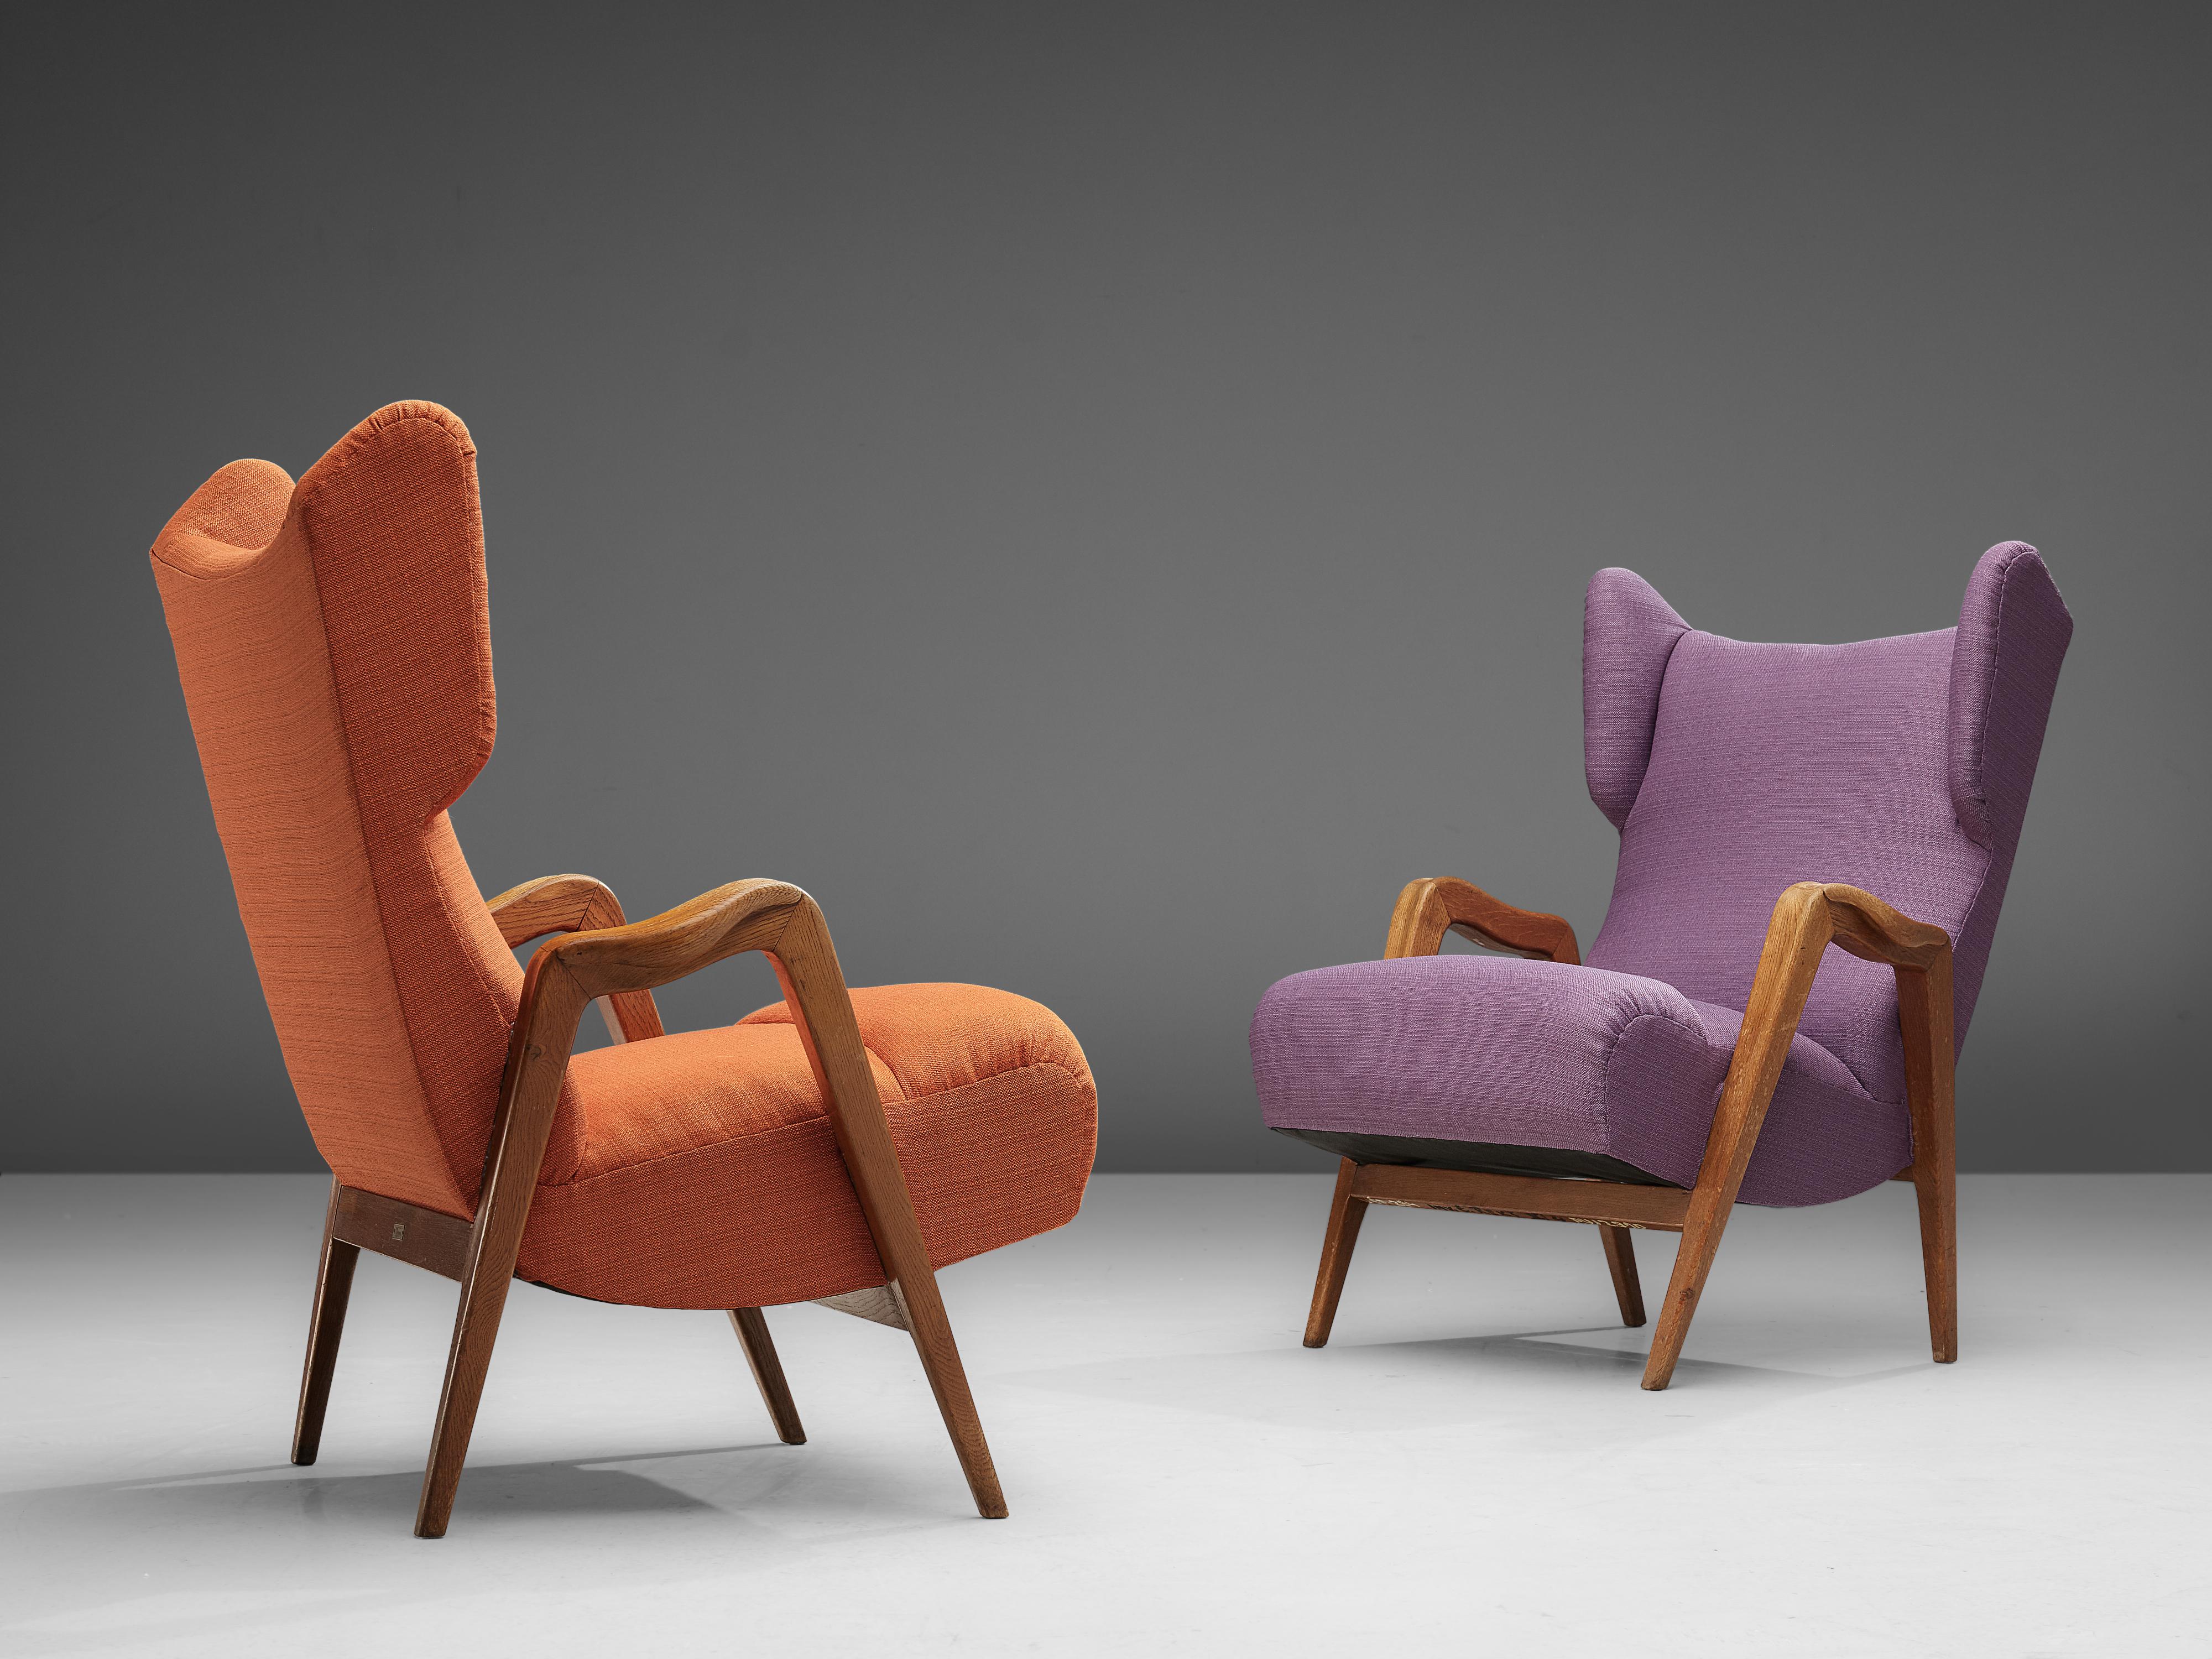 Pair of high wingback chairs, oak and orange and purple textured fabric, Czech Republic, 1950s

Sturdy and bulky set of wingback armchairs that features high backrests. The chairs are from late Art Deco period, as they show its distinctive